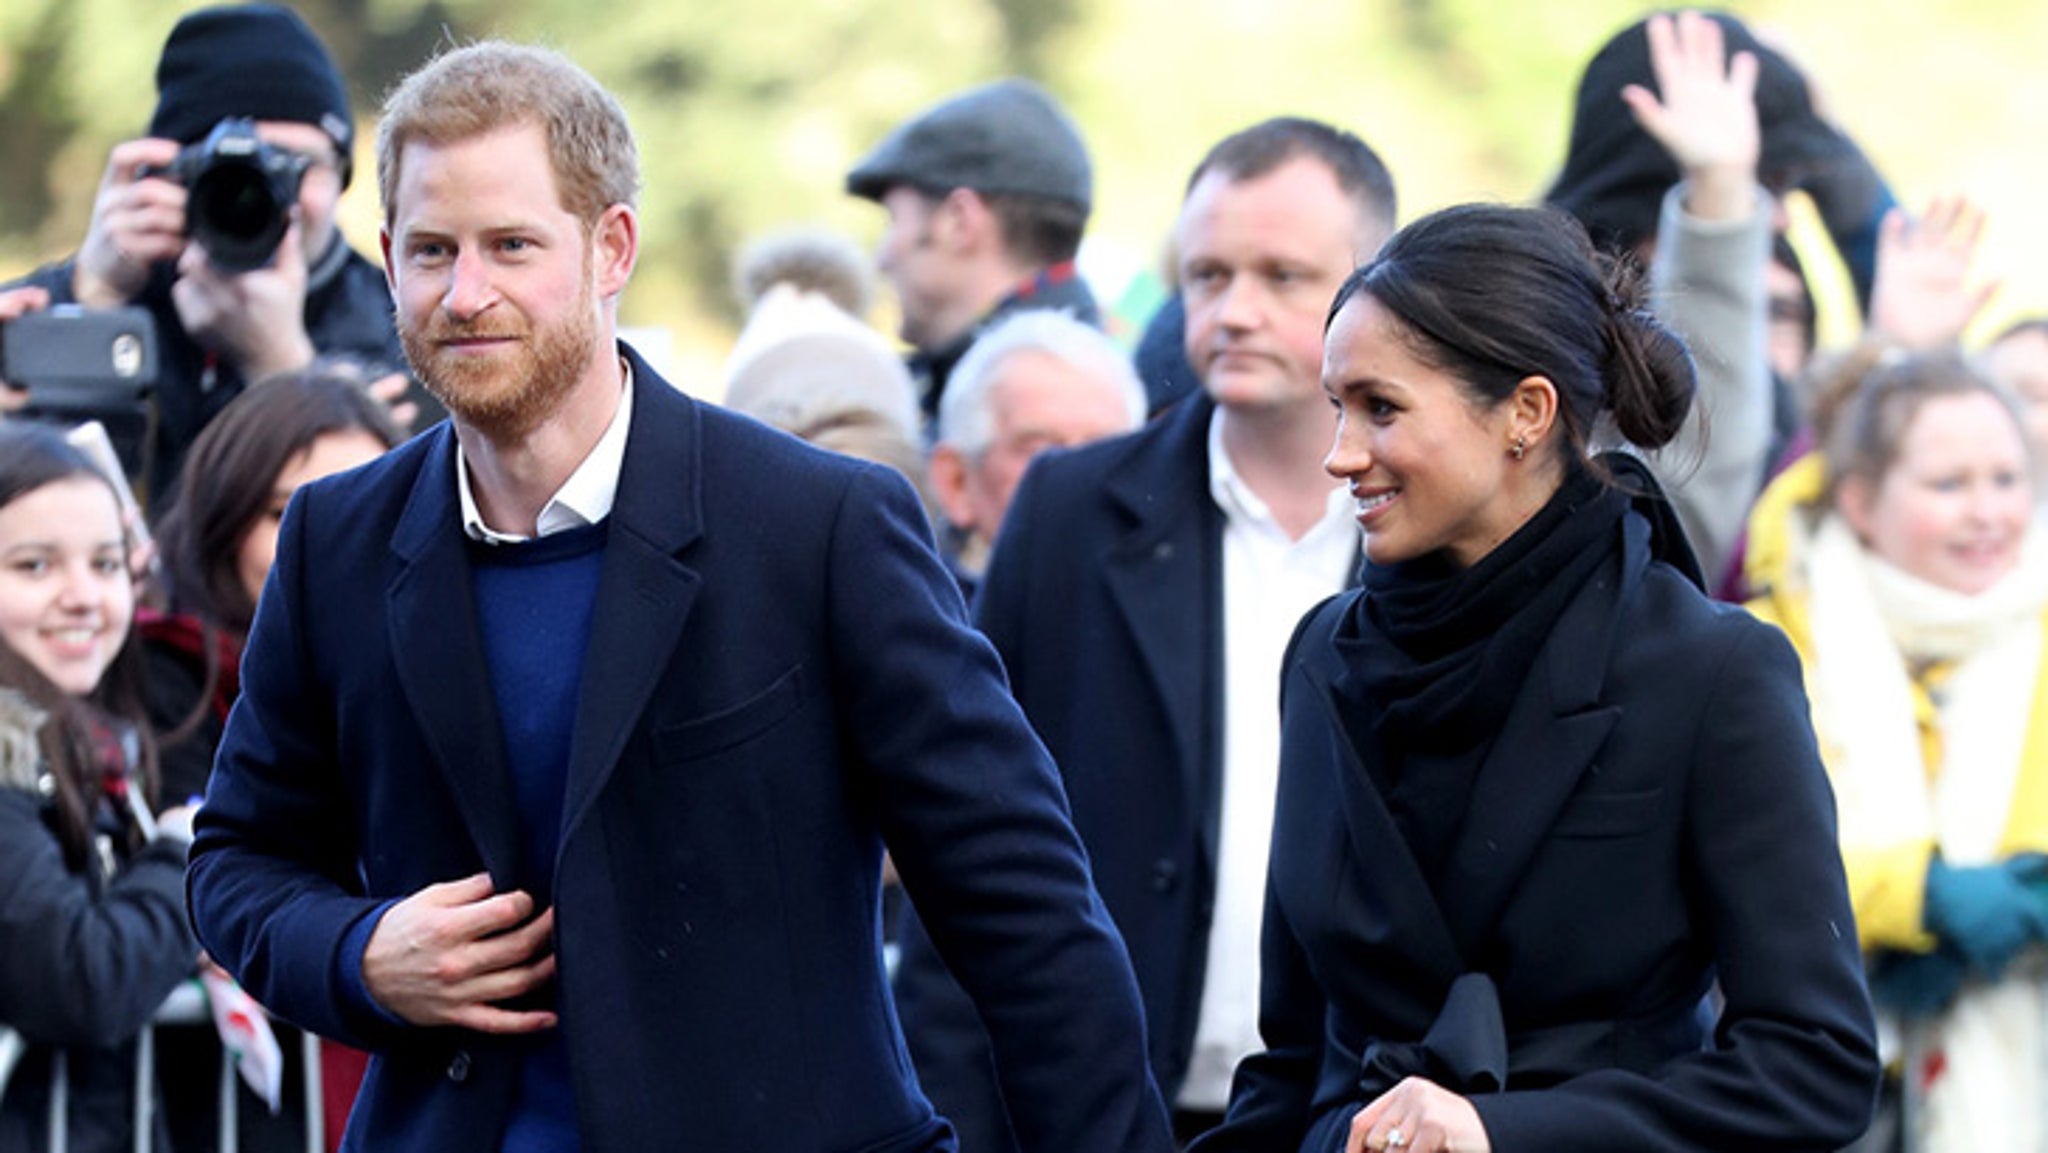 Prince Harry and Meghan Markle Make First Official Visit to Wales